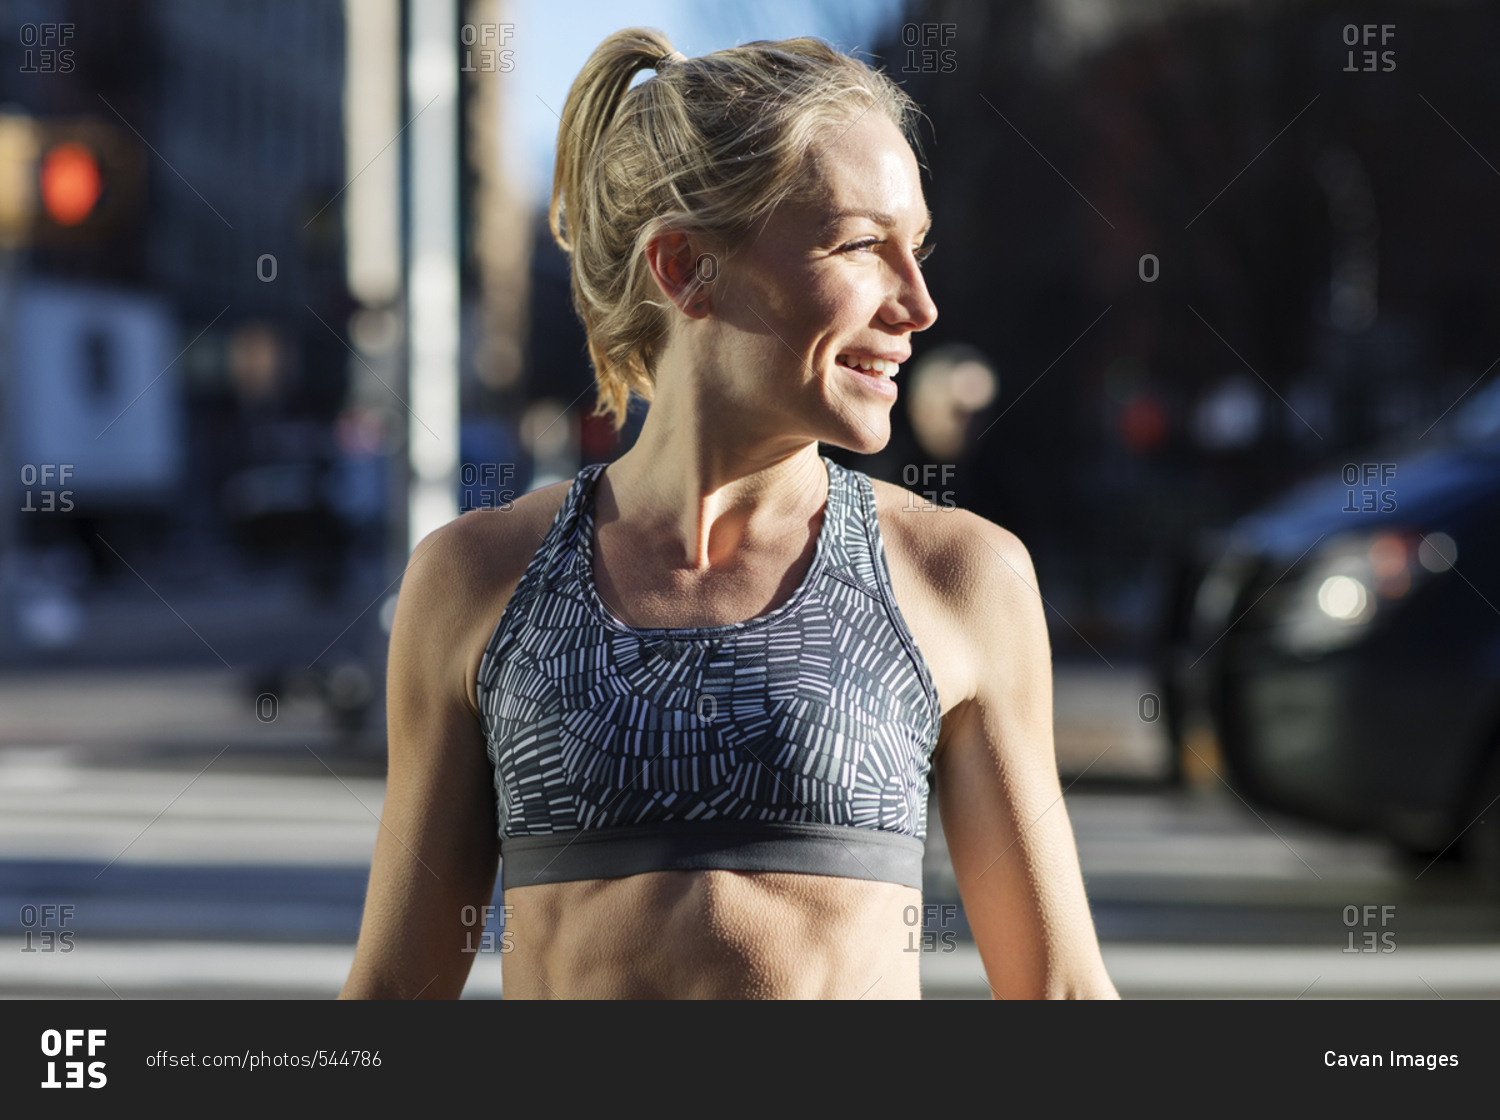 Female athlete looking away while standing on street during sunny day